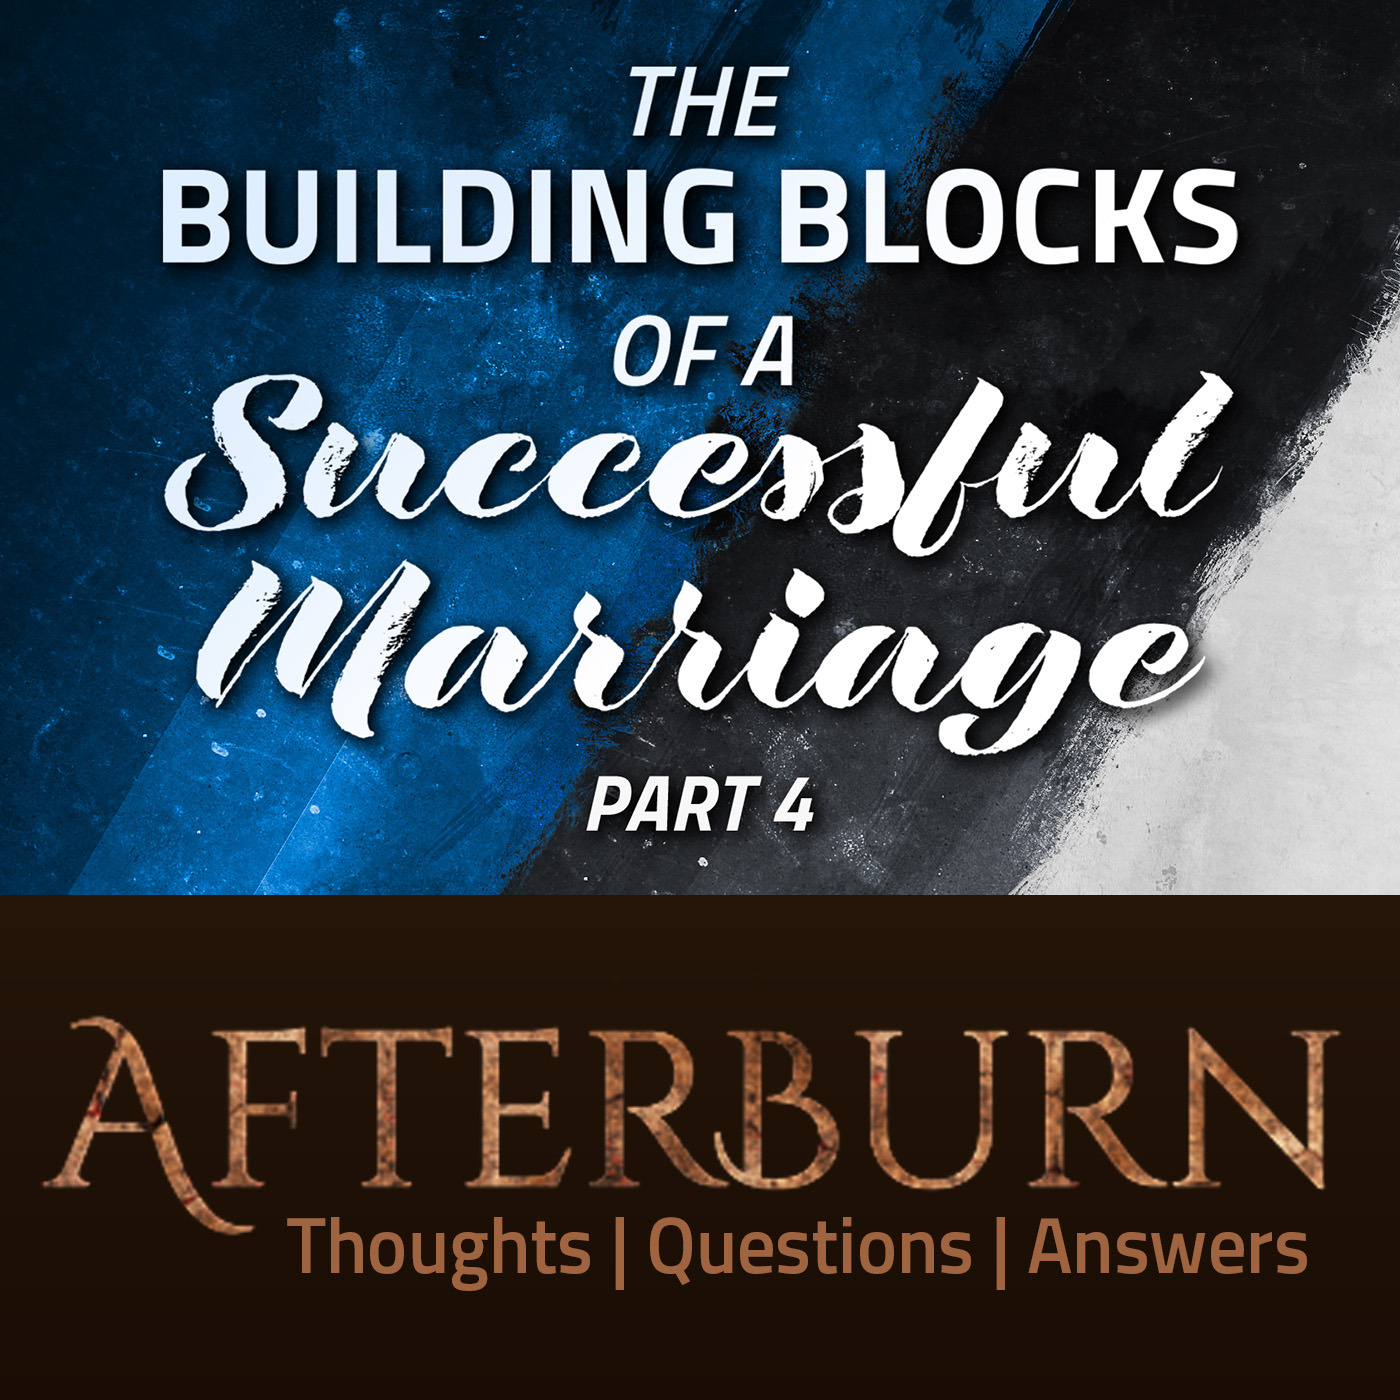 Episode 919: Afterburn | The Building Blocks of a Successful Marriage | Part 4